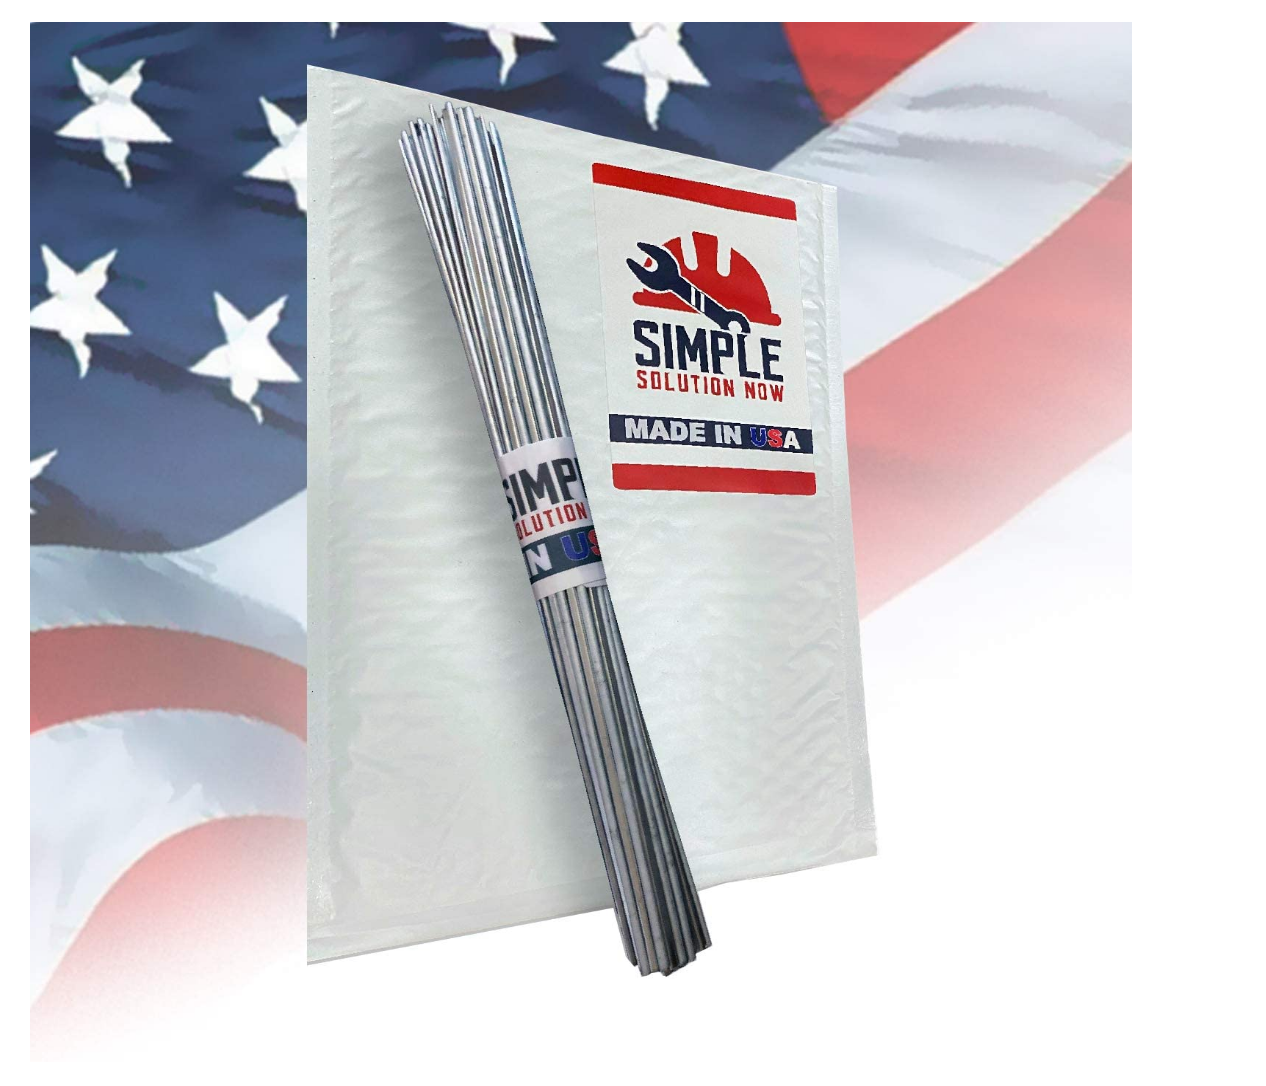 Simple Welding Rods USA Made – From Simple Solution Now Review